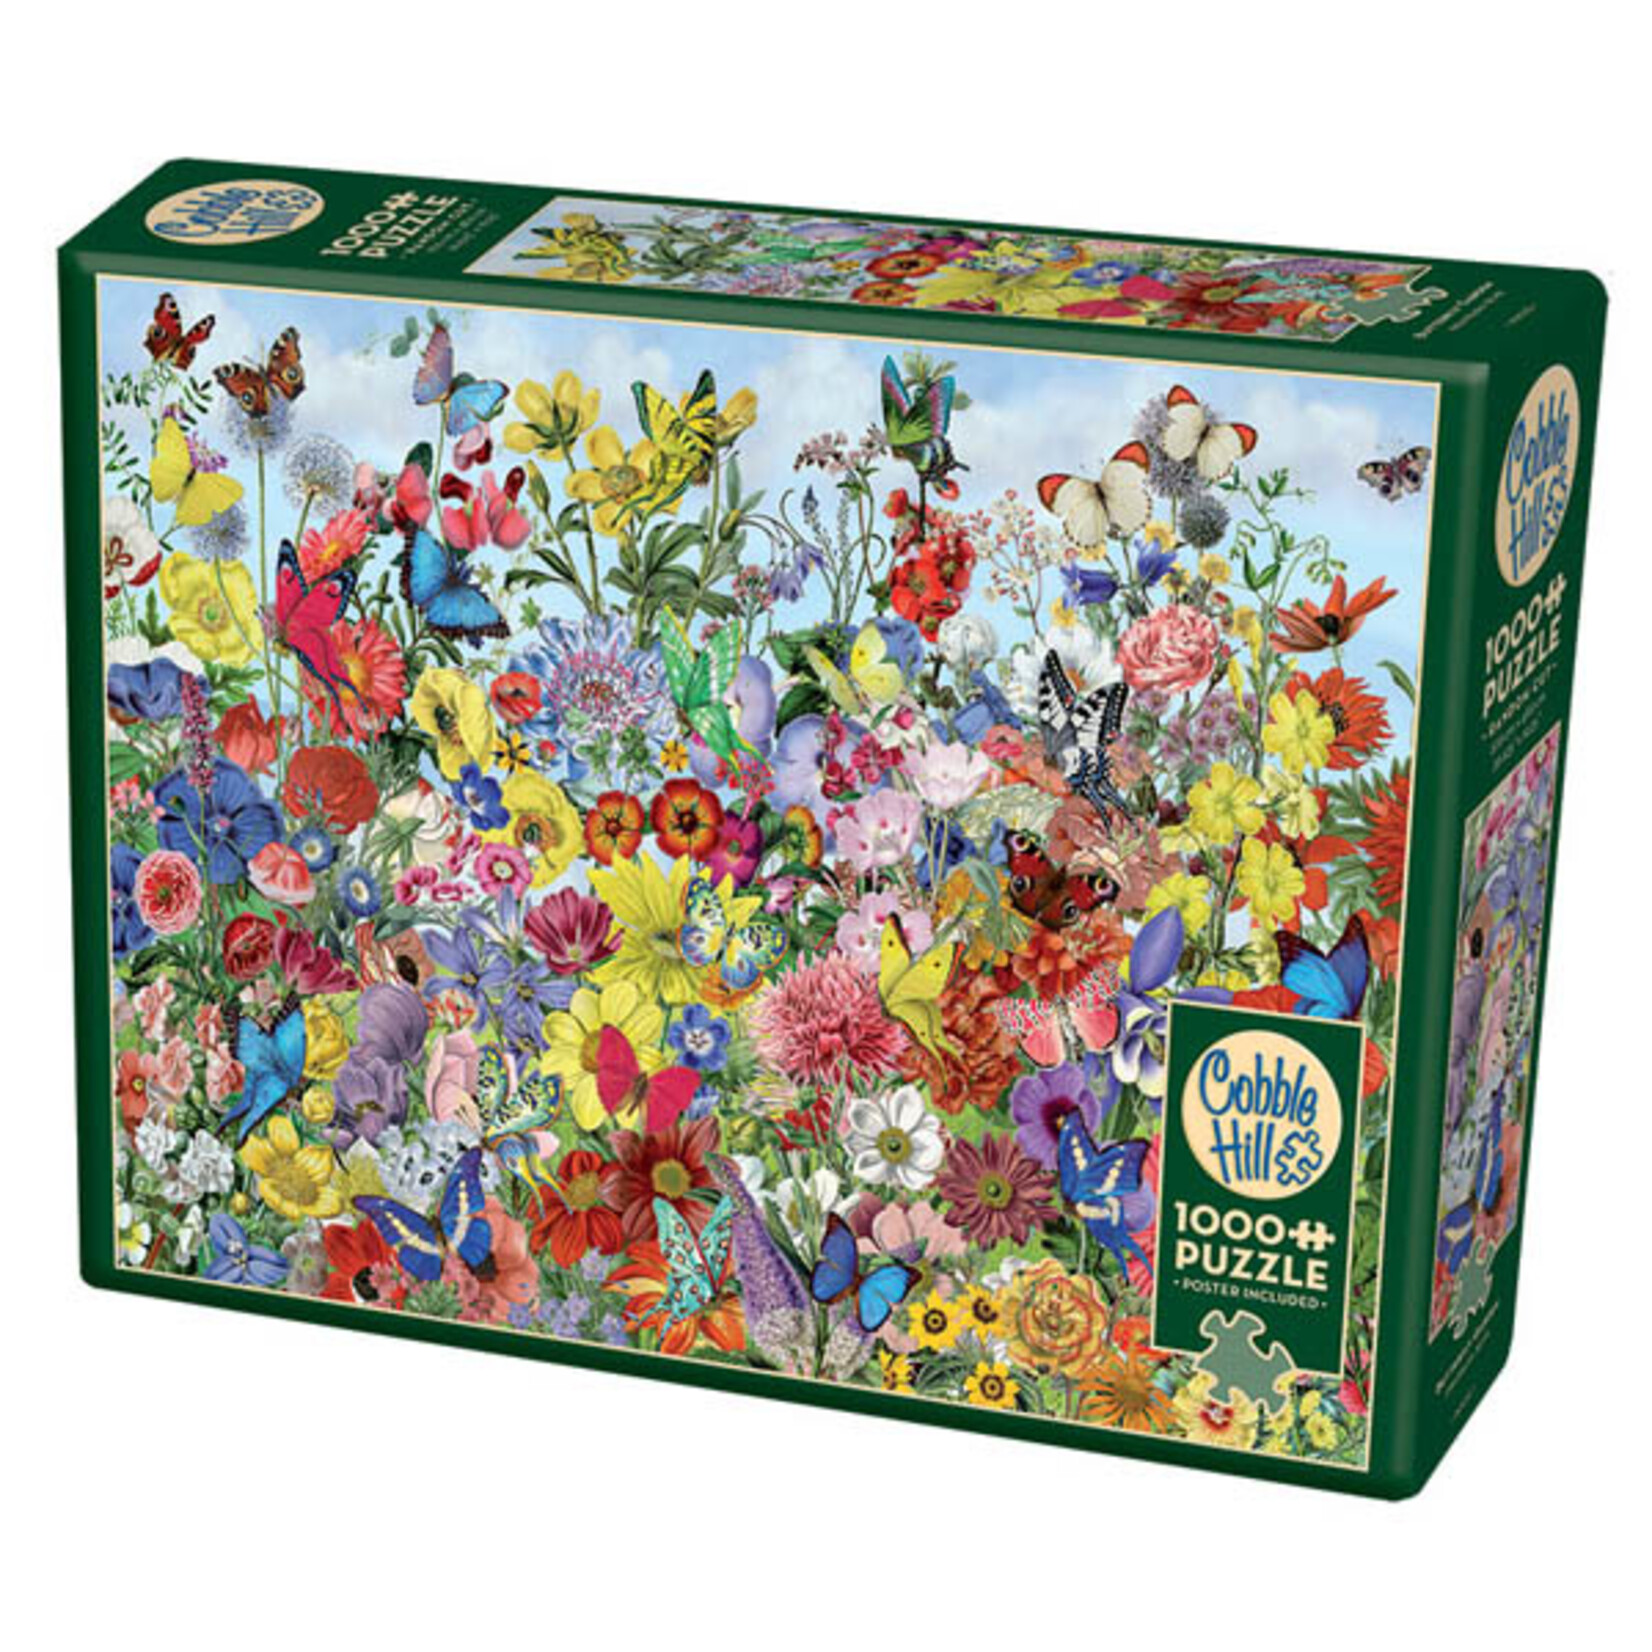 Cobble Hill Puzzles Butterfly Garden 1000pc